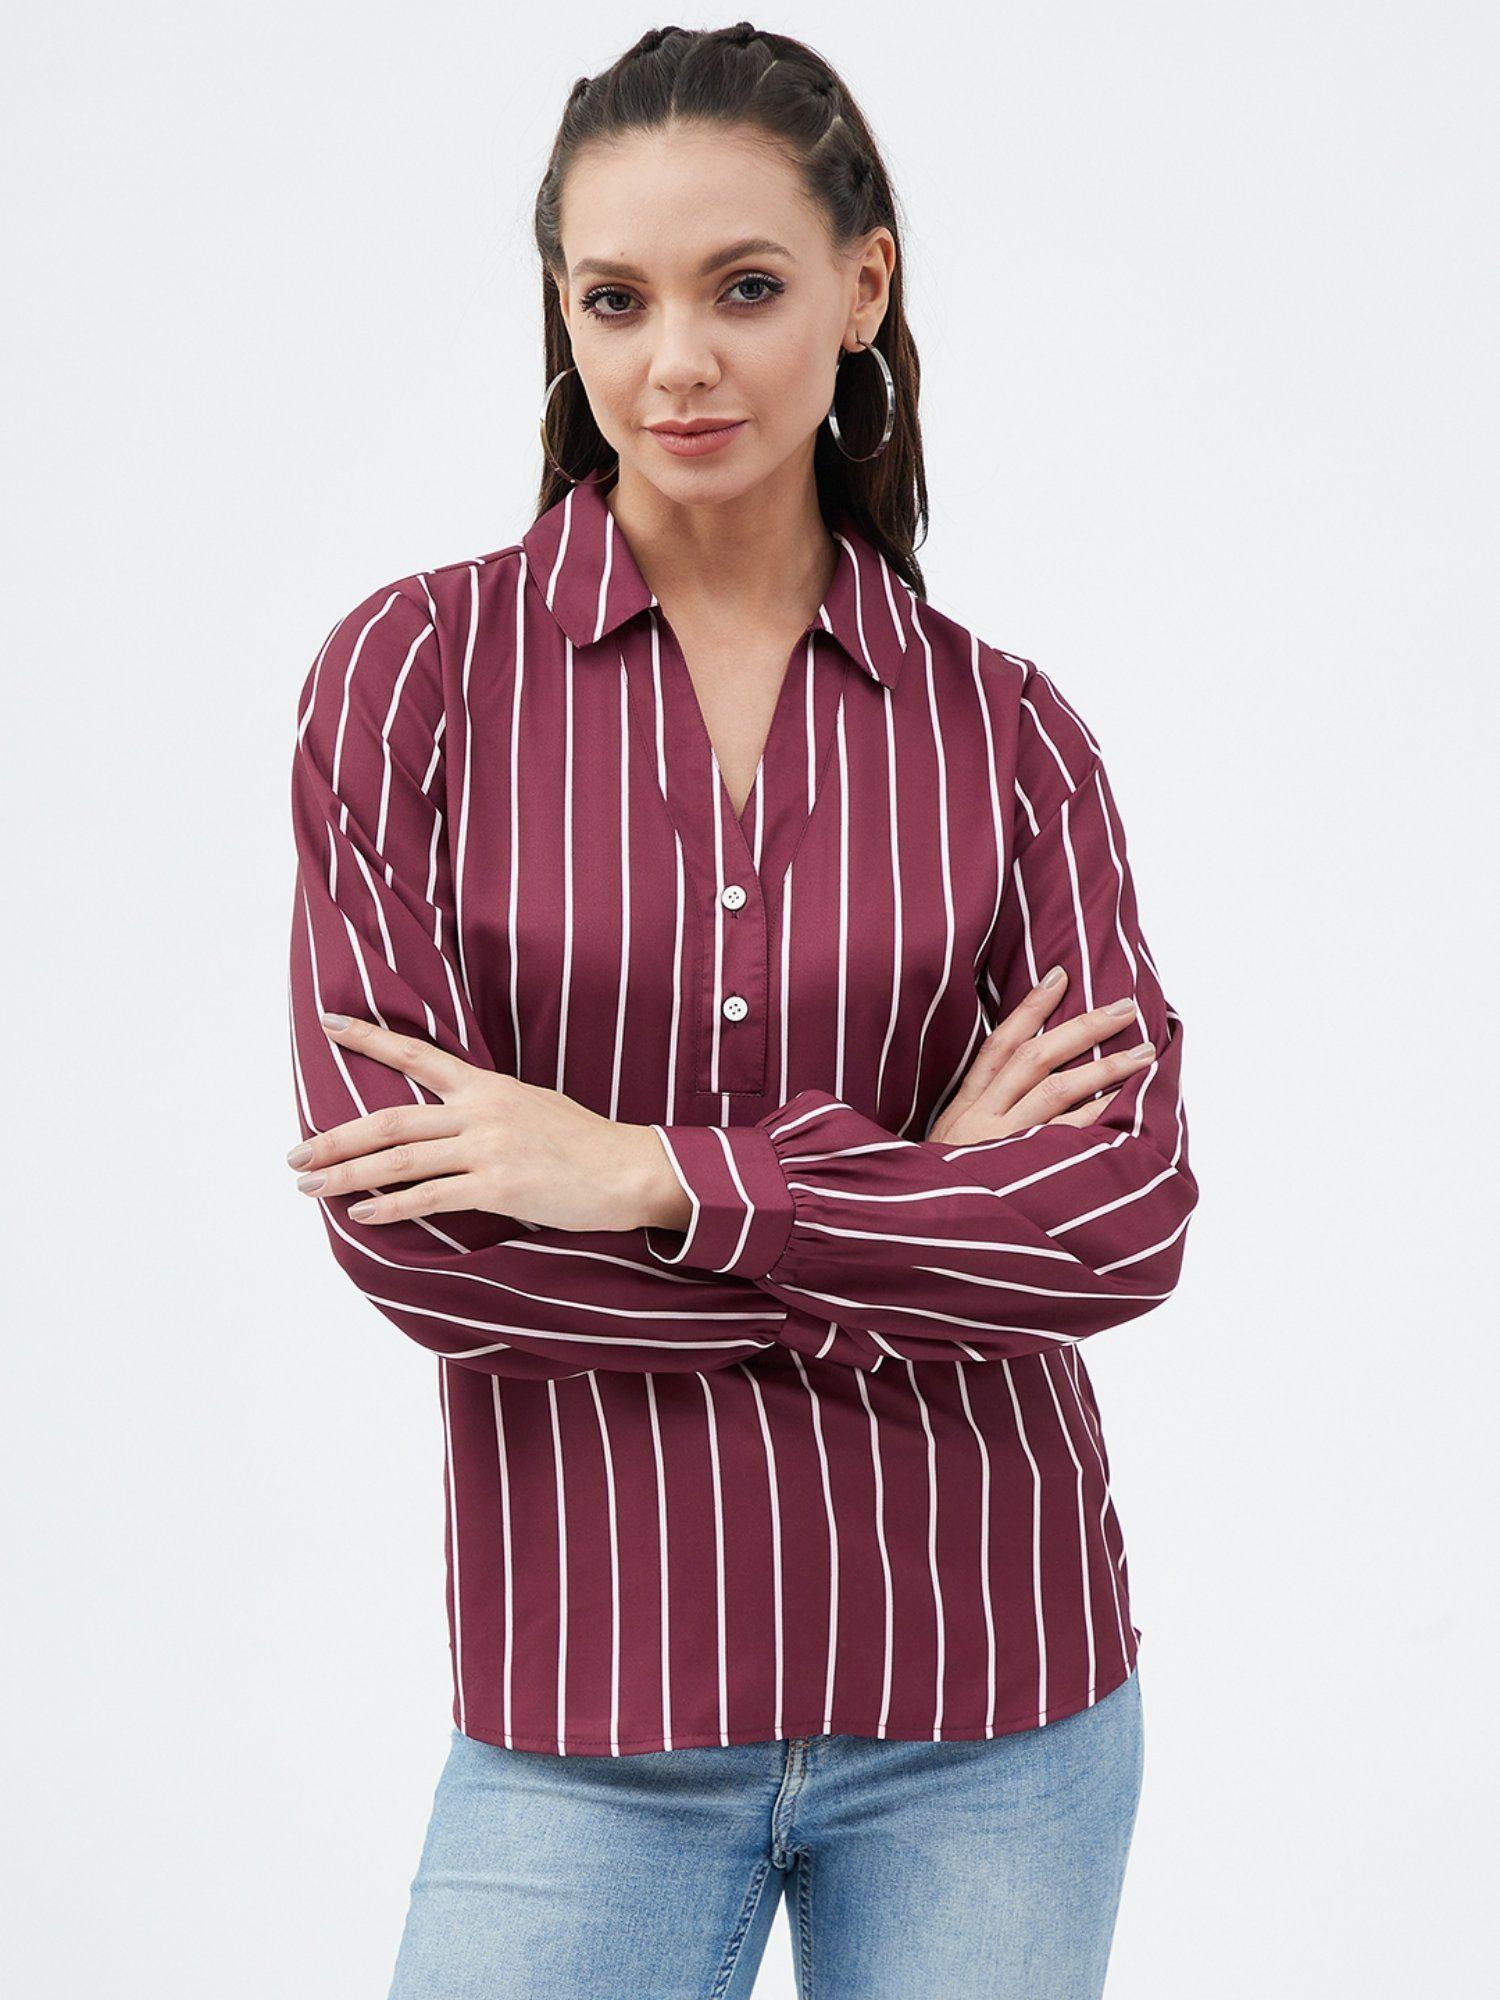 maroon collar neck shirt style striped top